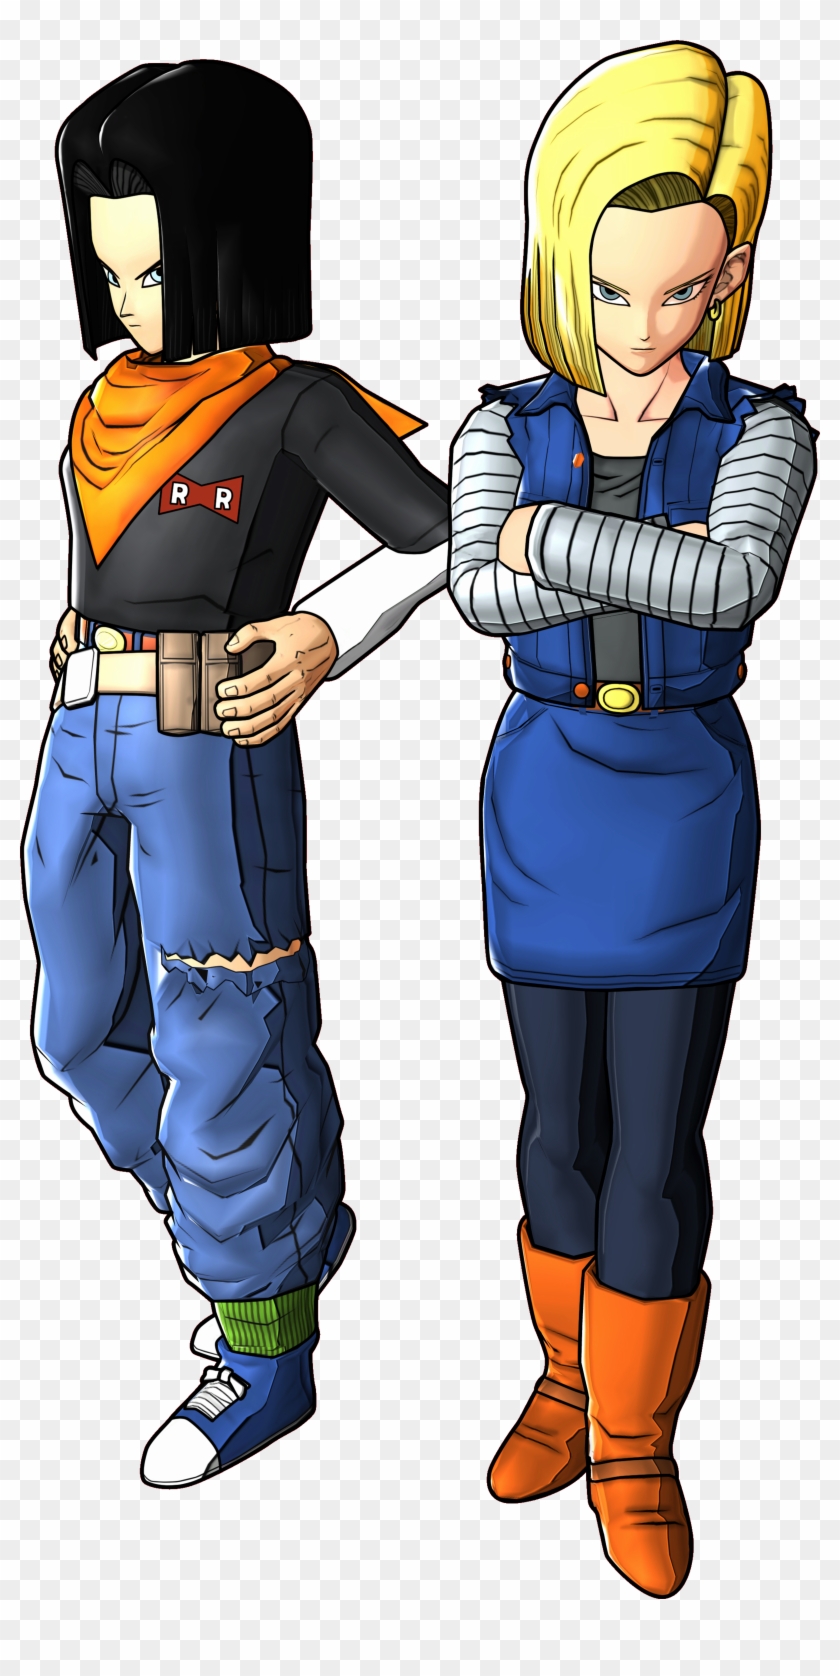 Android18 And 17 Battle Of Z Render - Android 18 E 17 Imagens Clipart #1767248